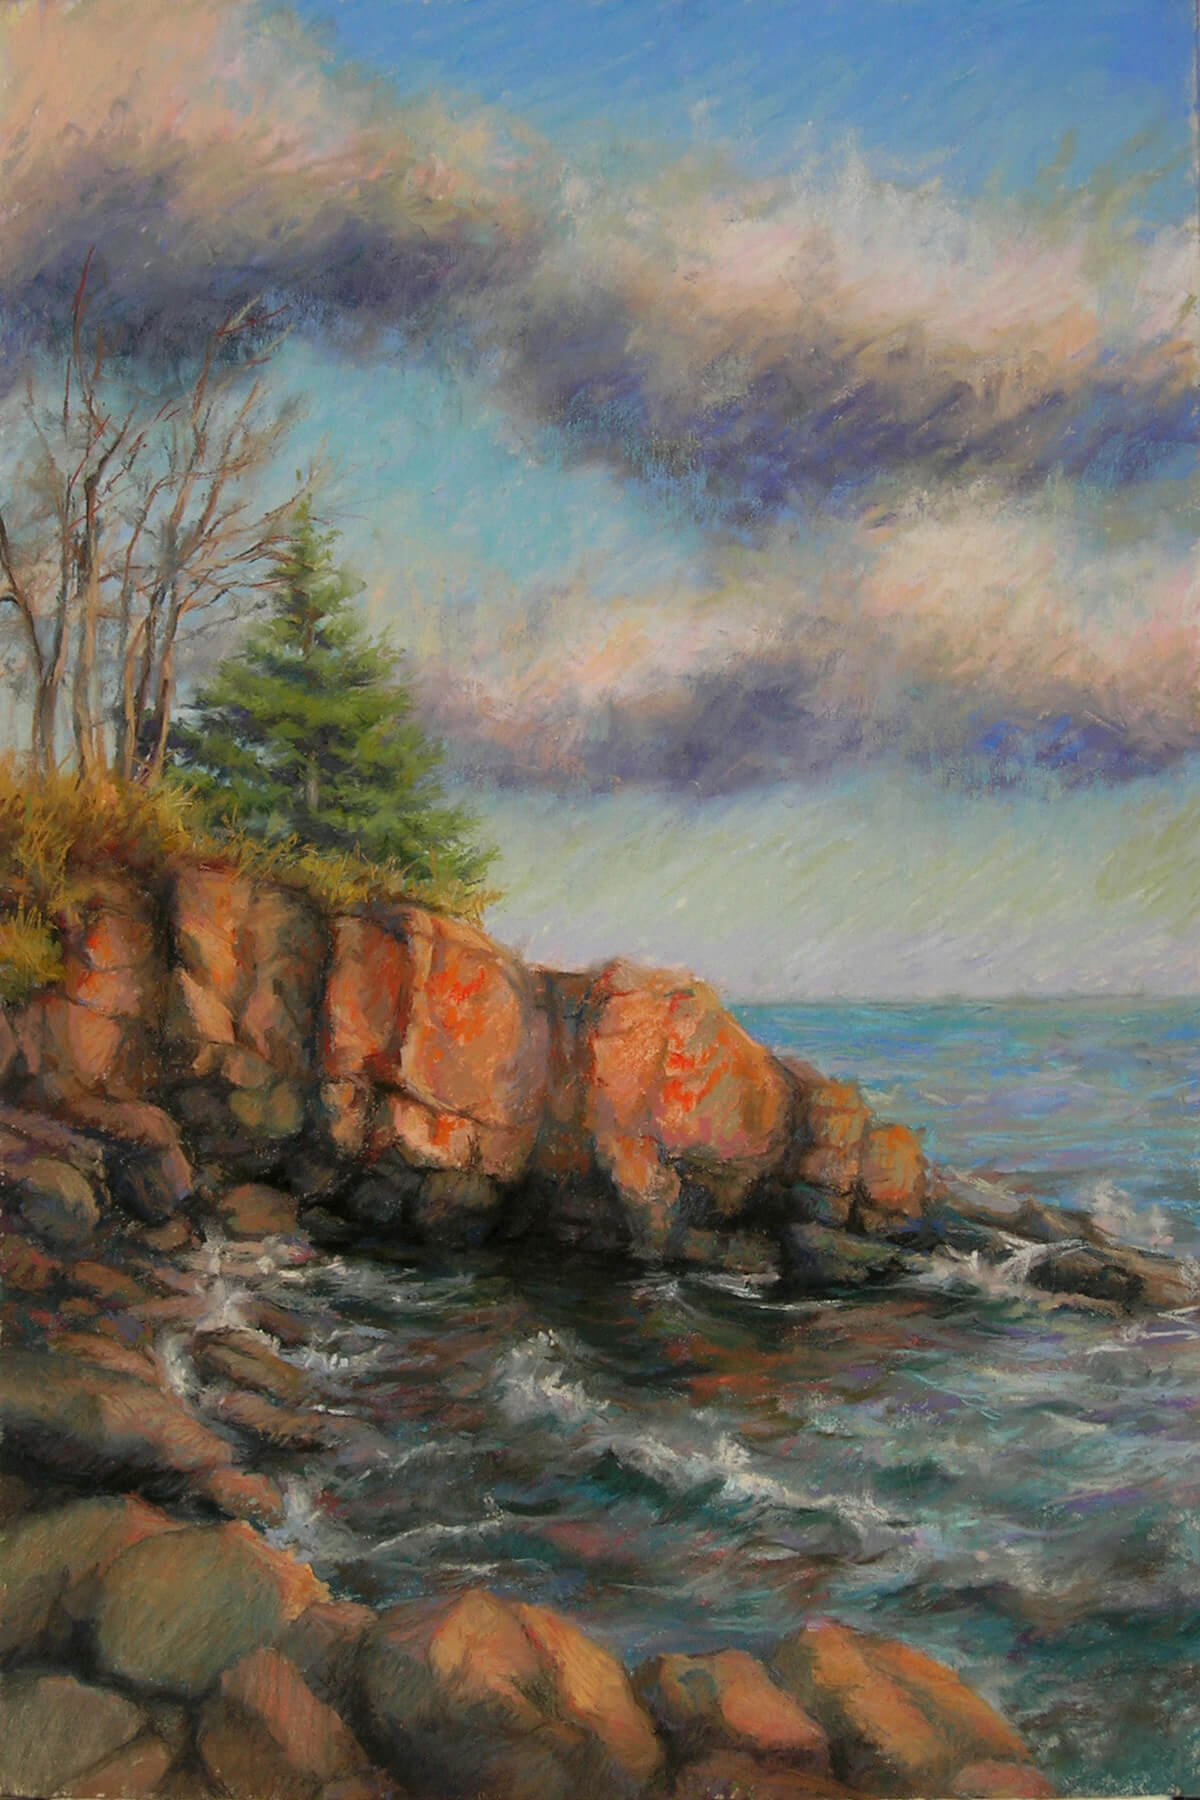 Image of a pastel painting of the rocky shore line of Lake Superior